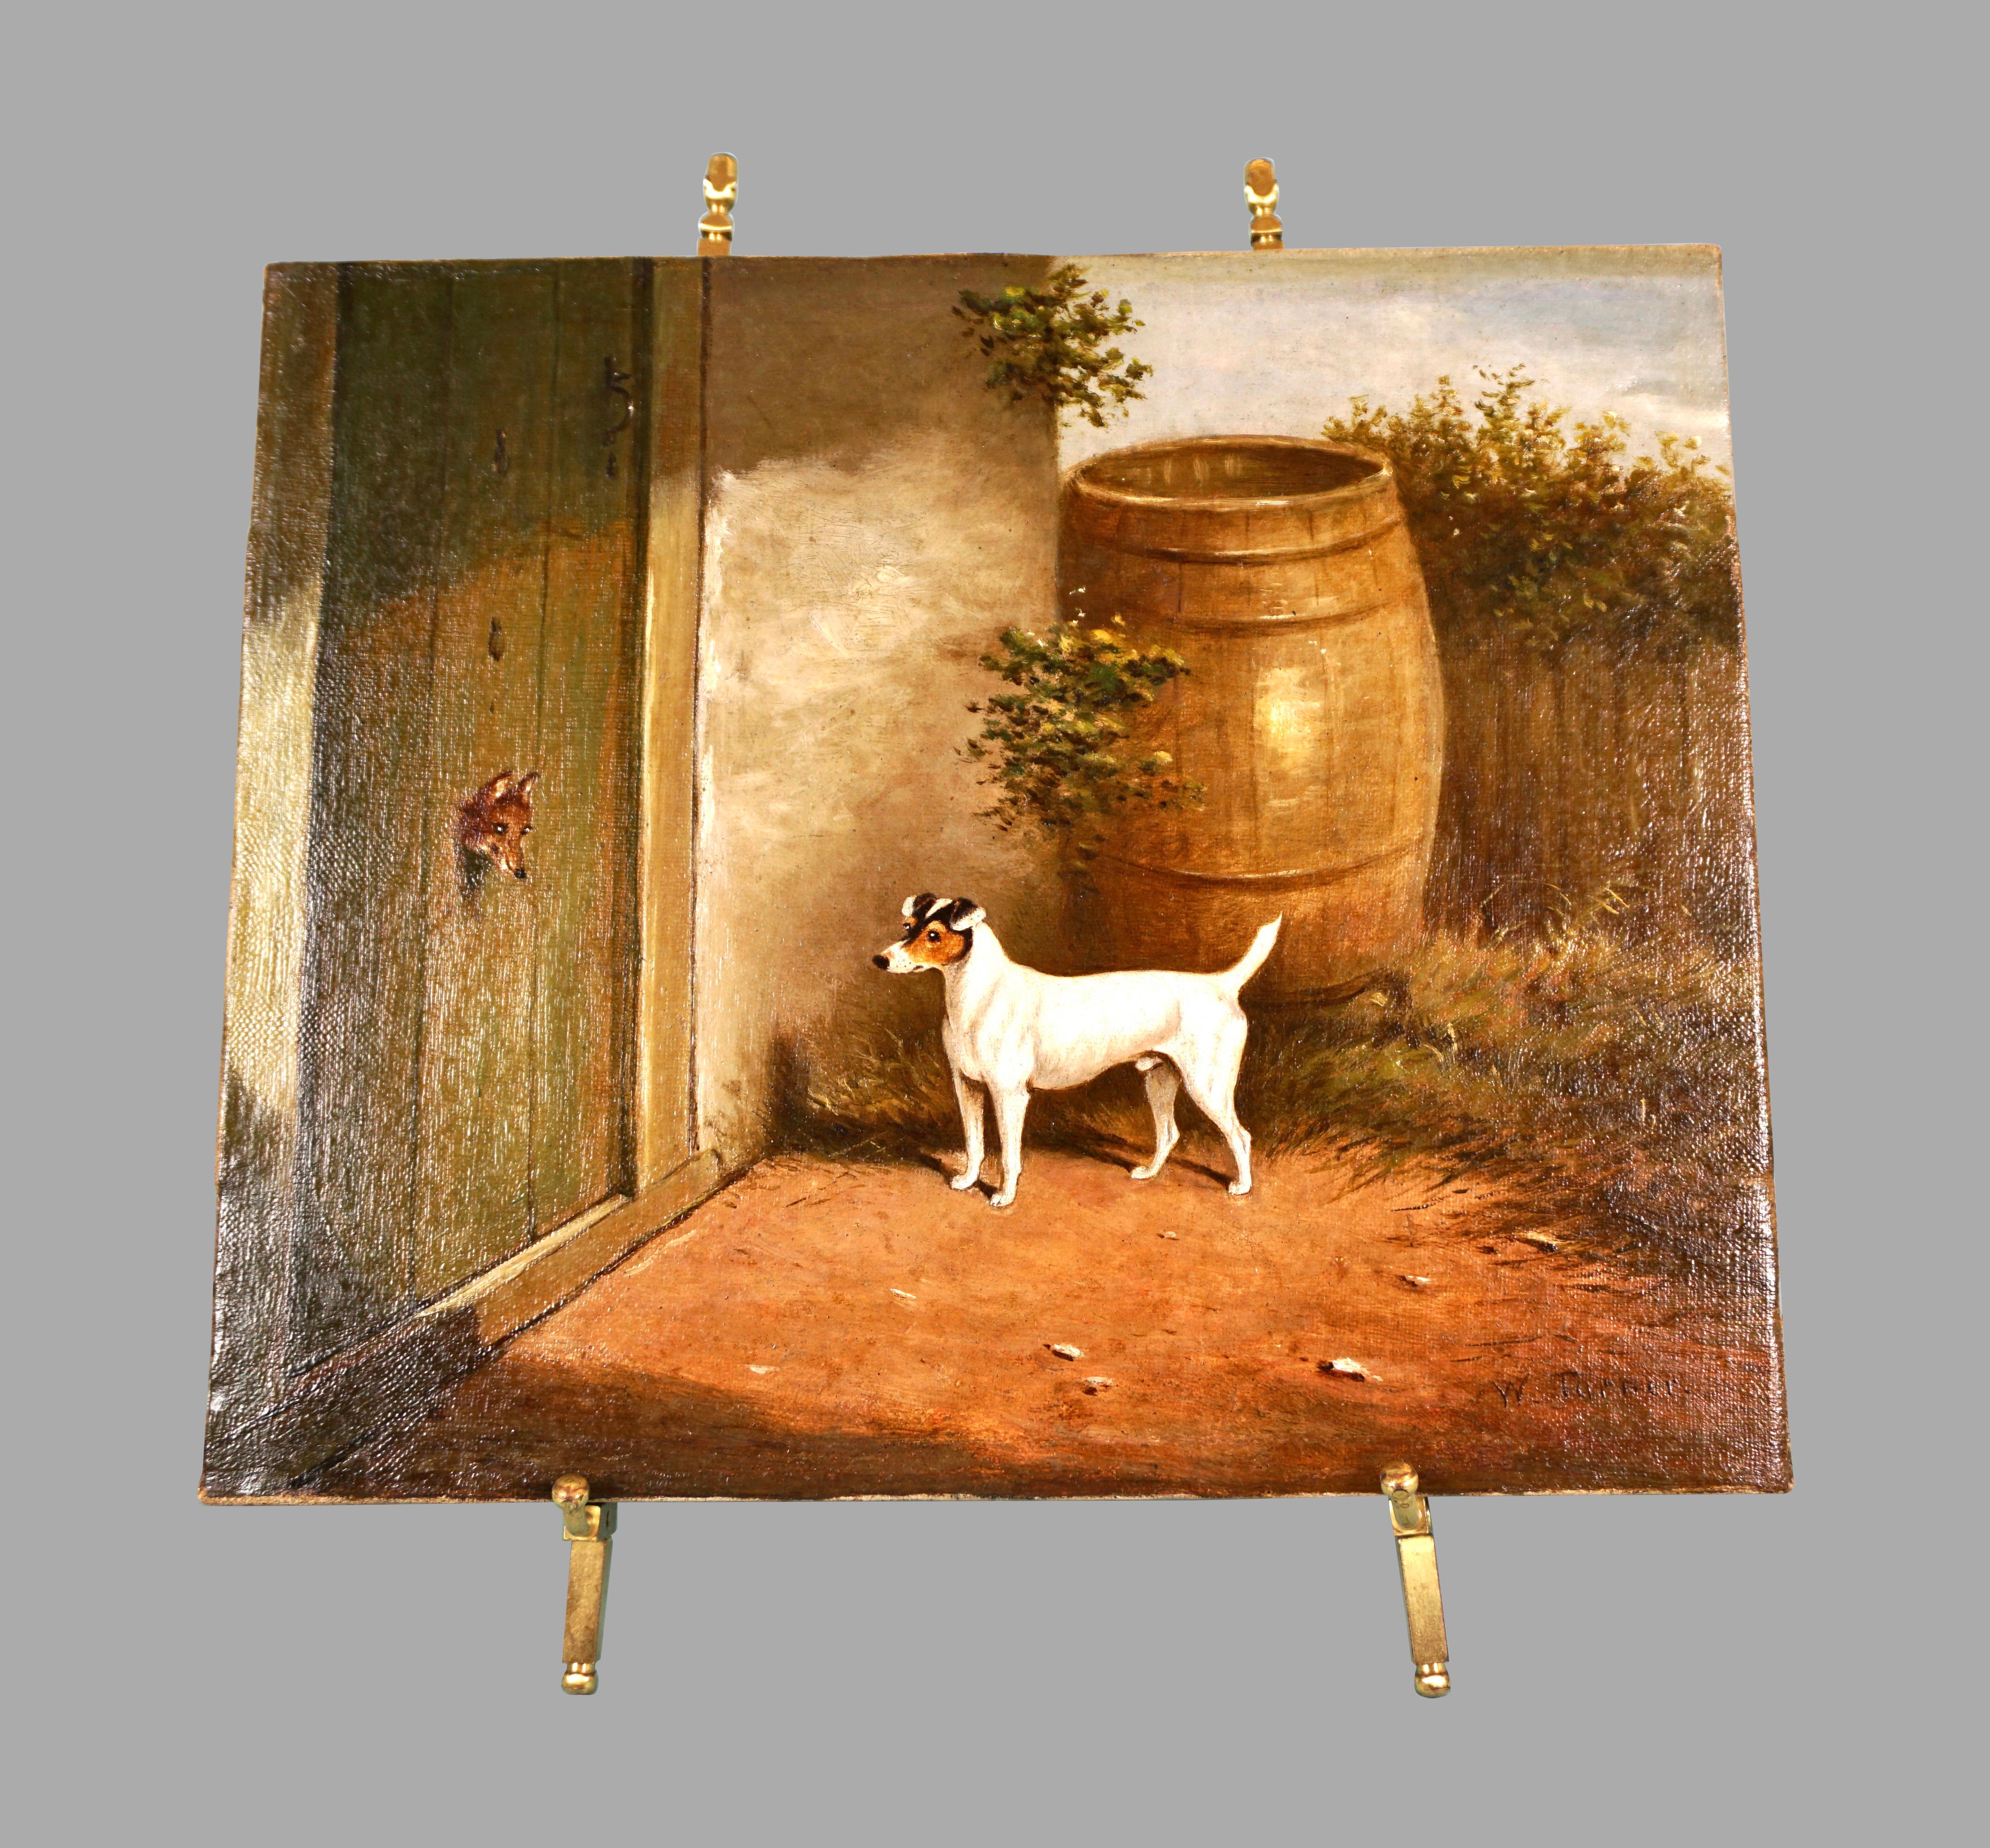 A charming, bright and well-executed oil on canvas depicting a Jack Russell terrier in a bucolic setting, the sturdy dog appearing to eyeball the sly fox hiding in a hole in the front door of rustic building. A nice example of English provincial